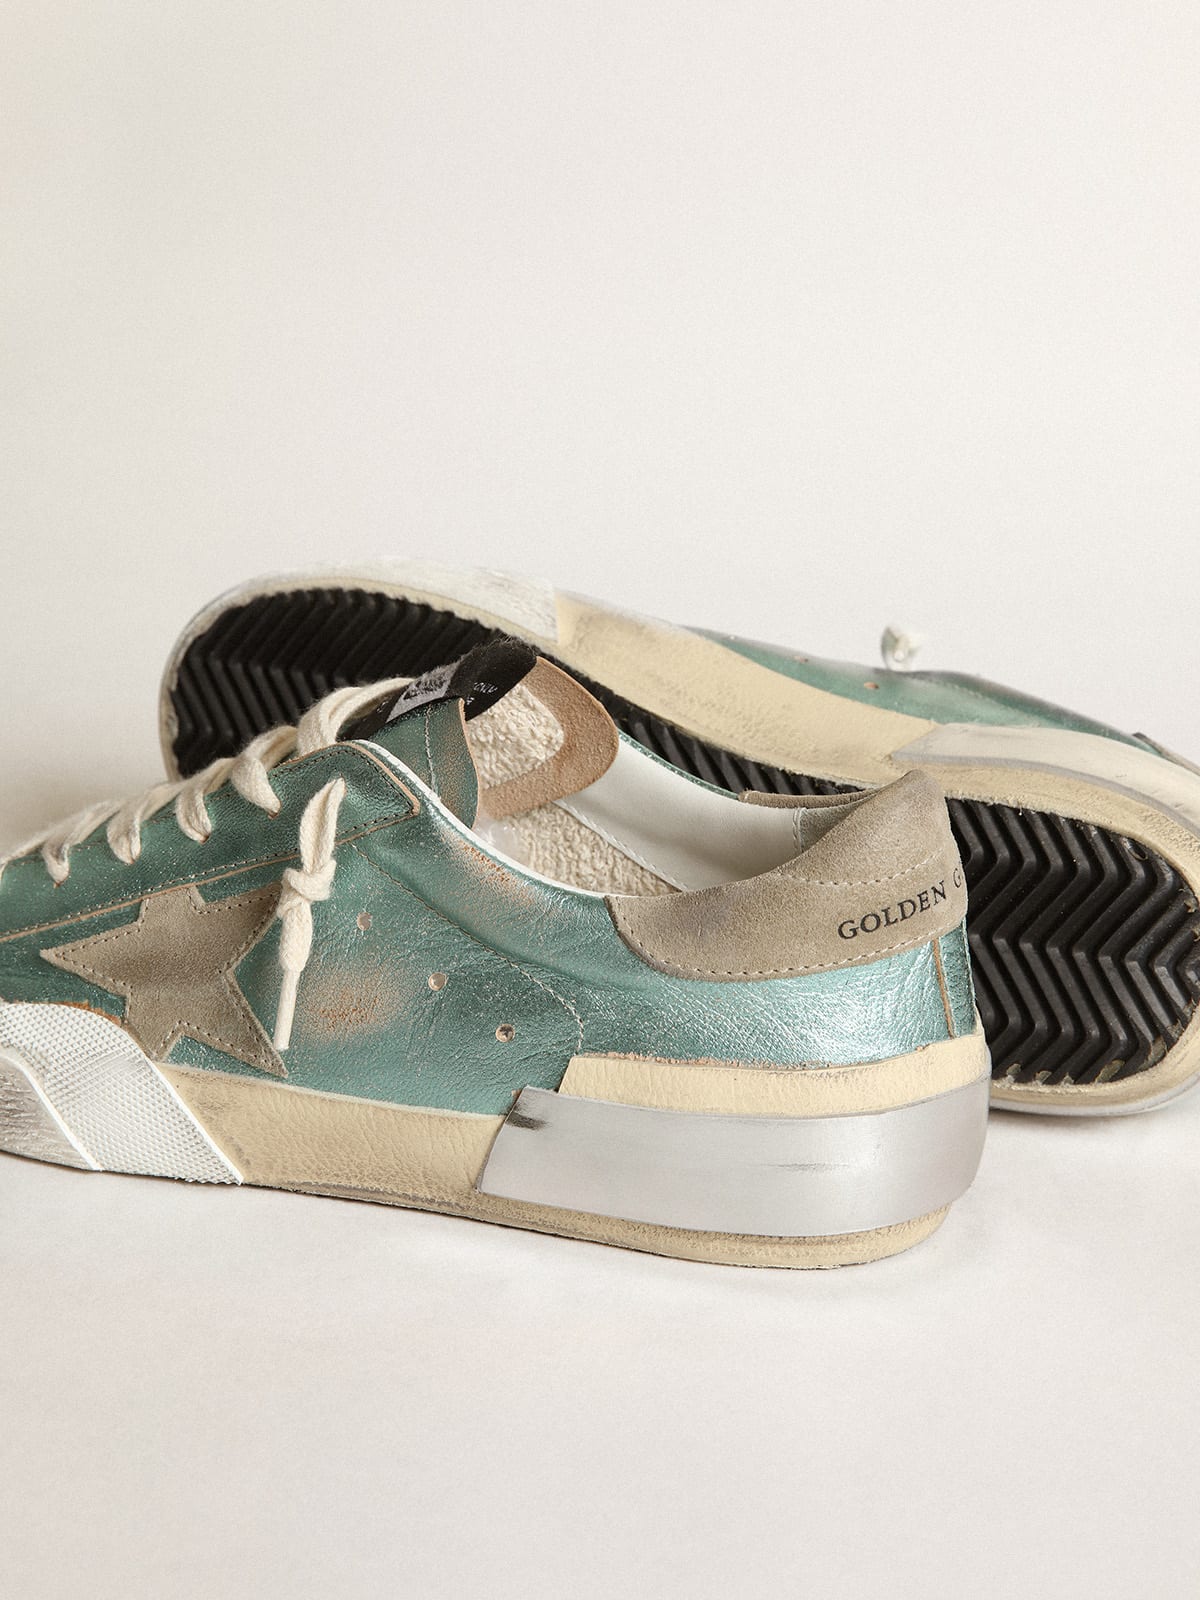 Golden Goose - Women's Super-Star in mint green laminated leather with gray star in 